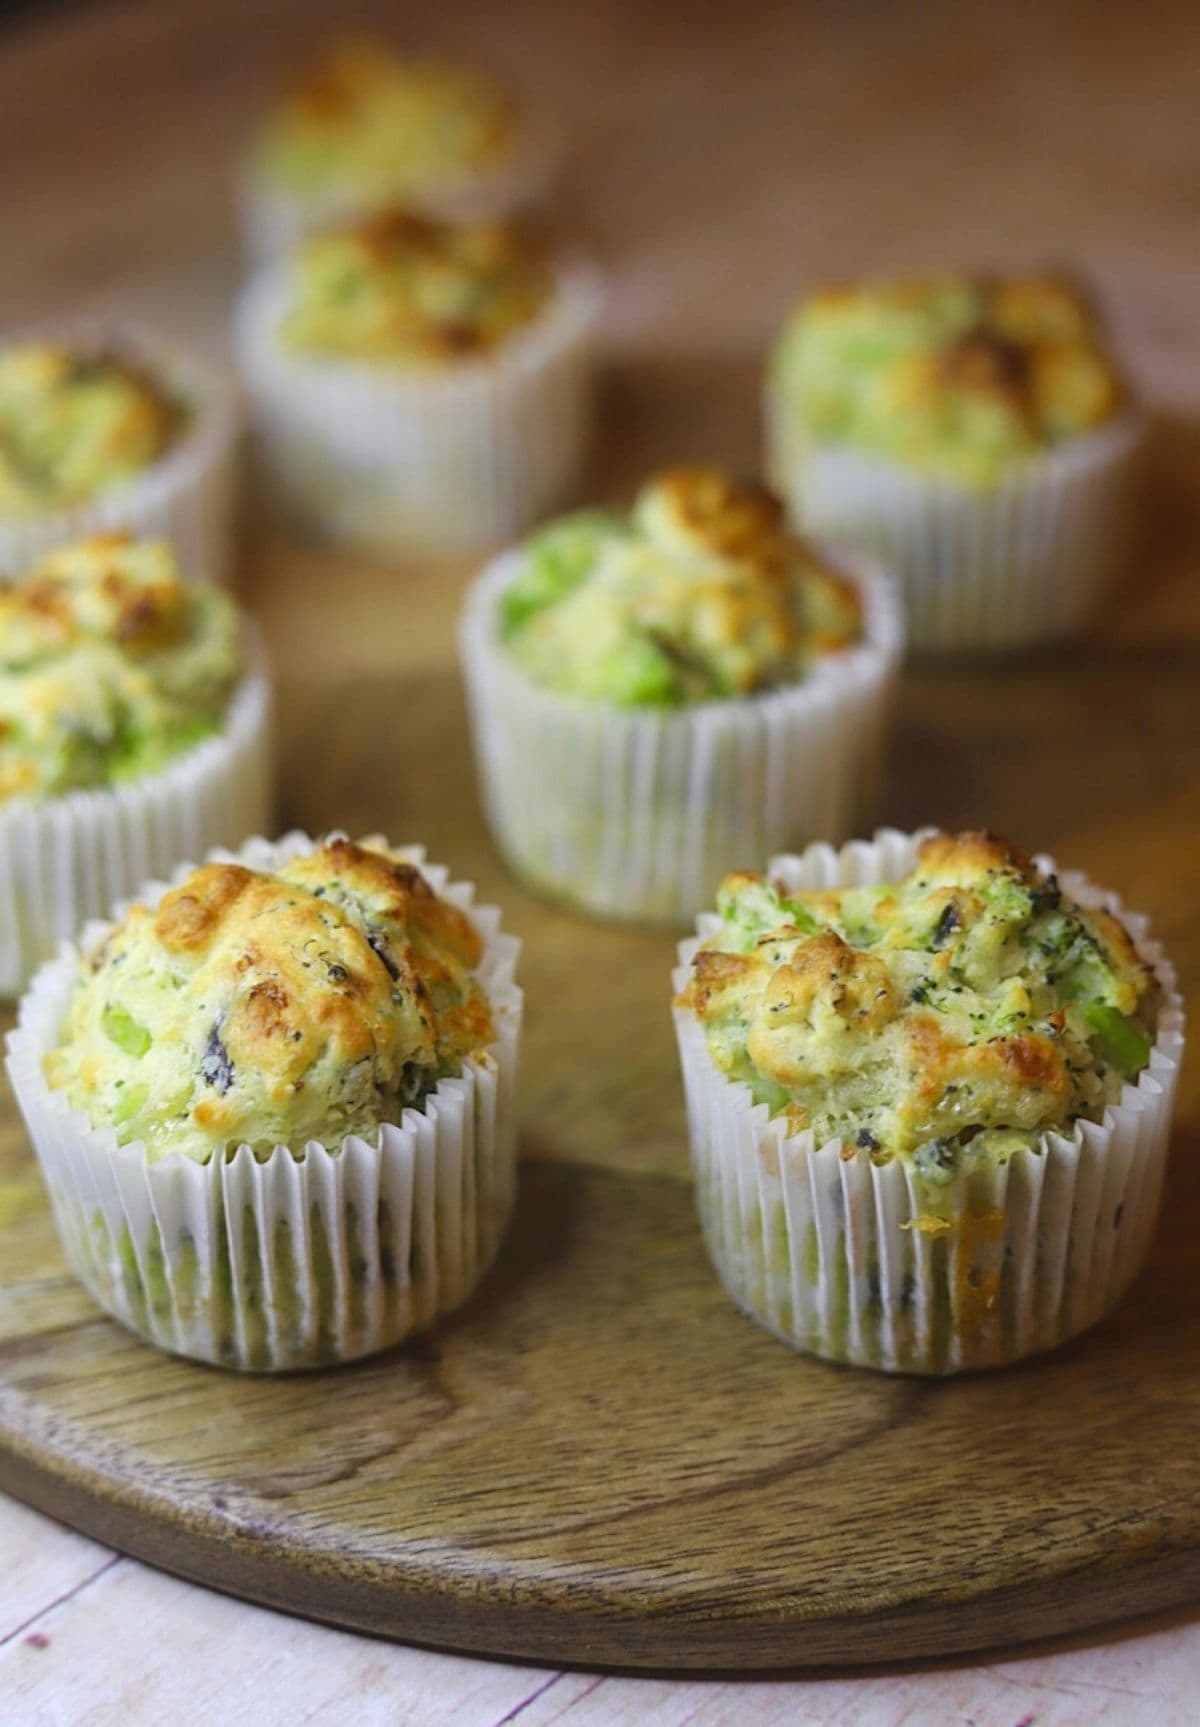 Freshly baked broccoli and cheese muffins in their paper cups on a wooden board.